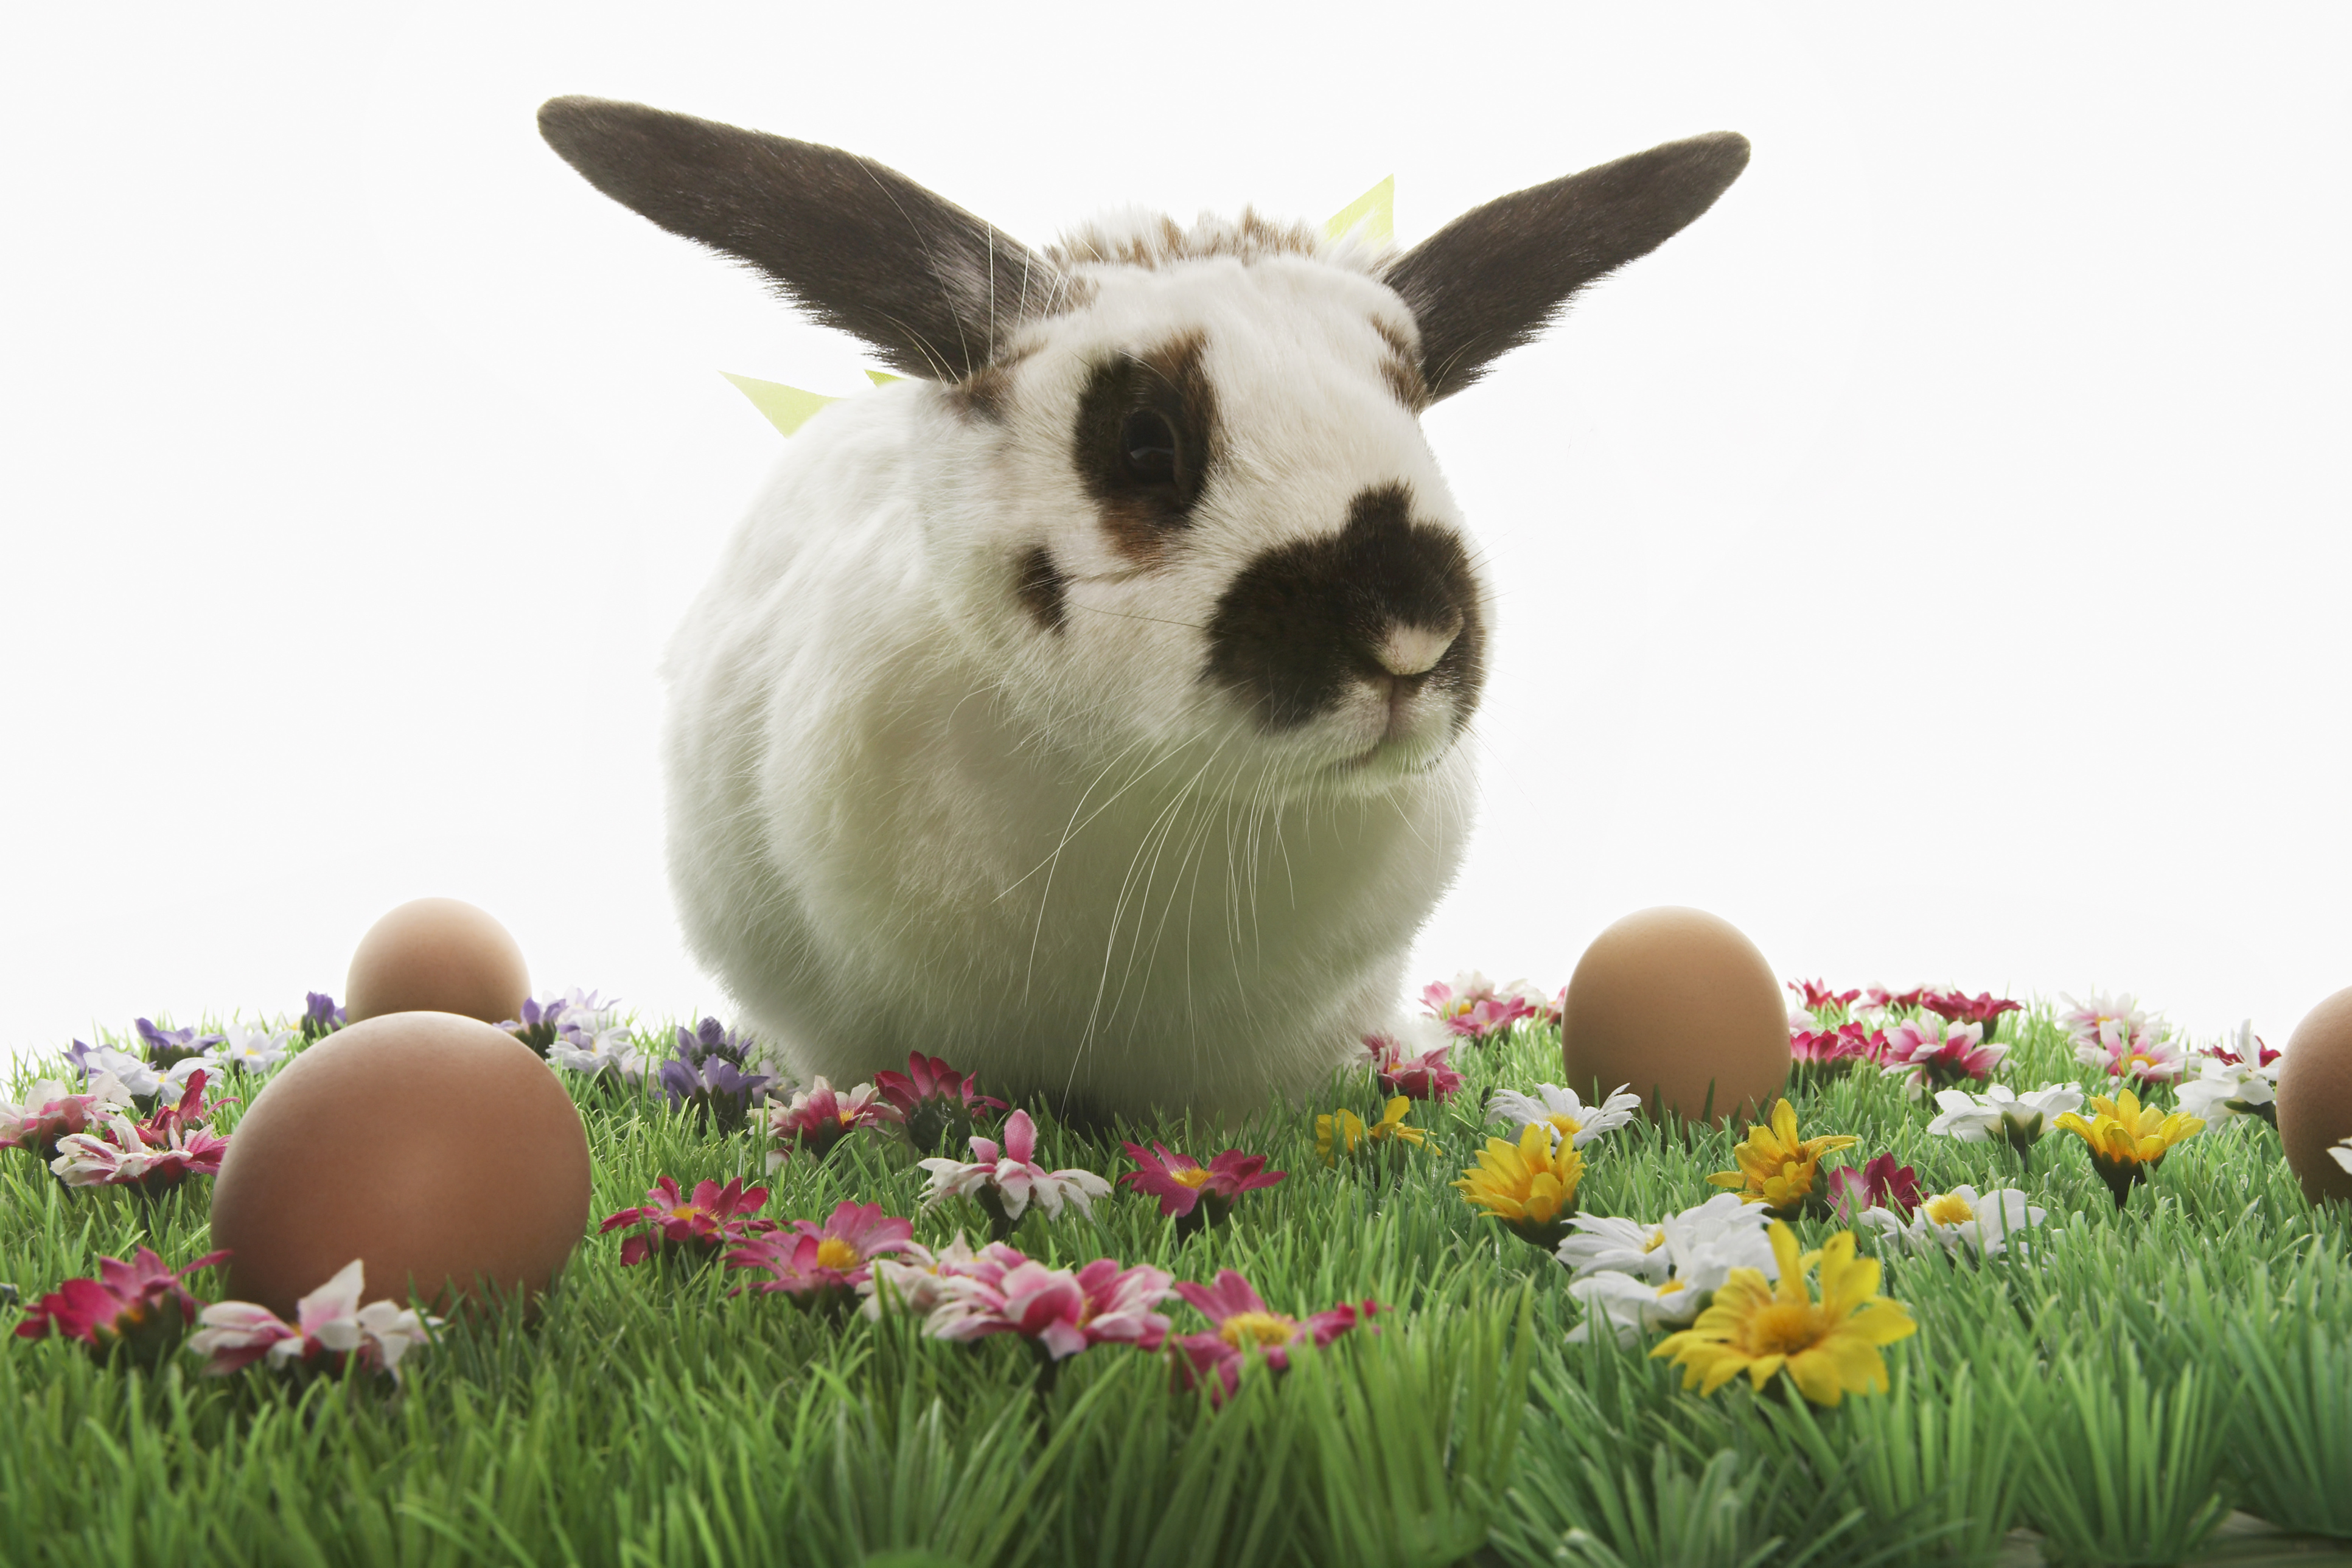 Do bunnies, colored eggs diminish true meaning of Easter?, Religion